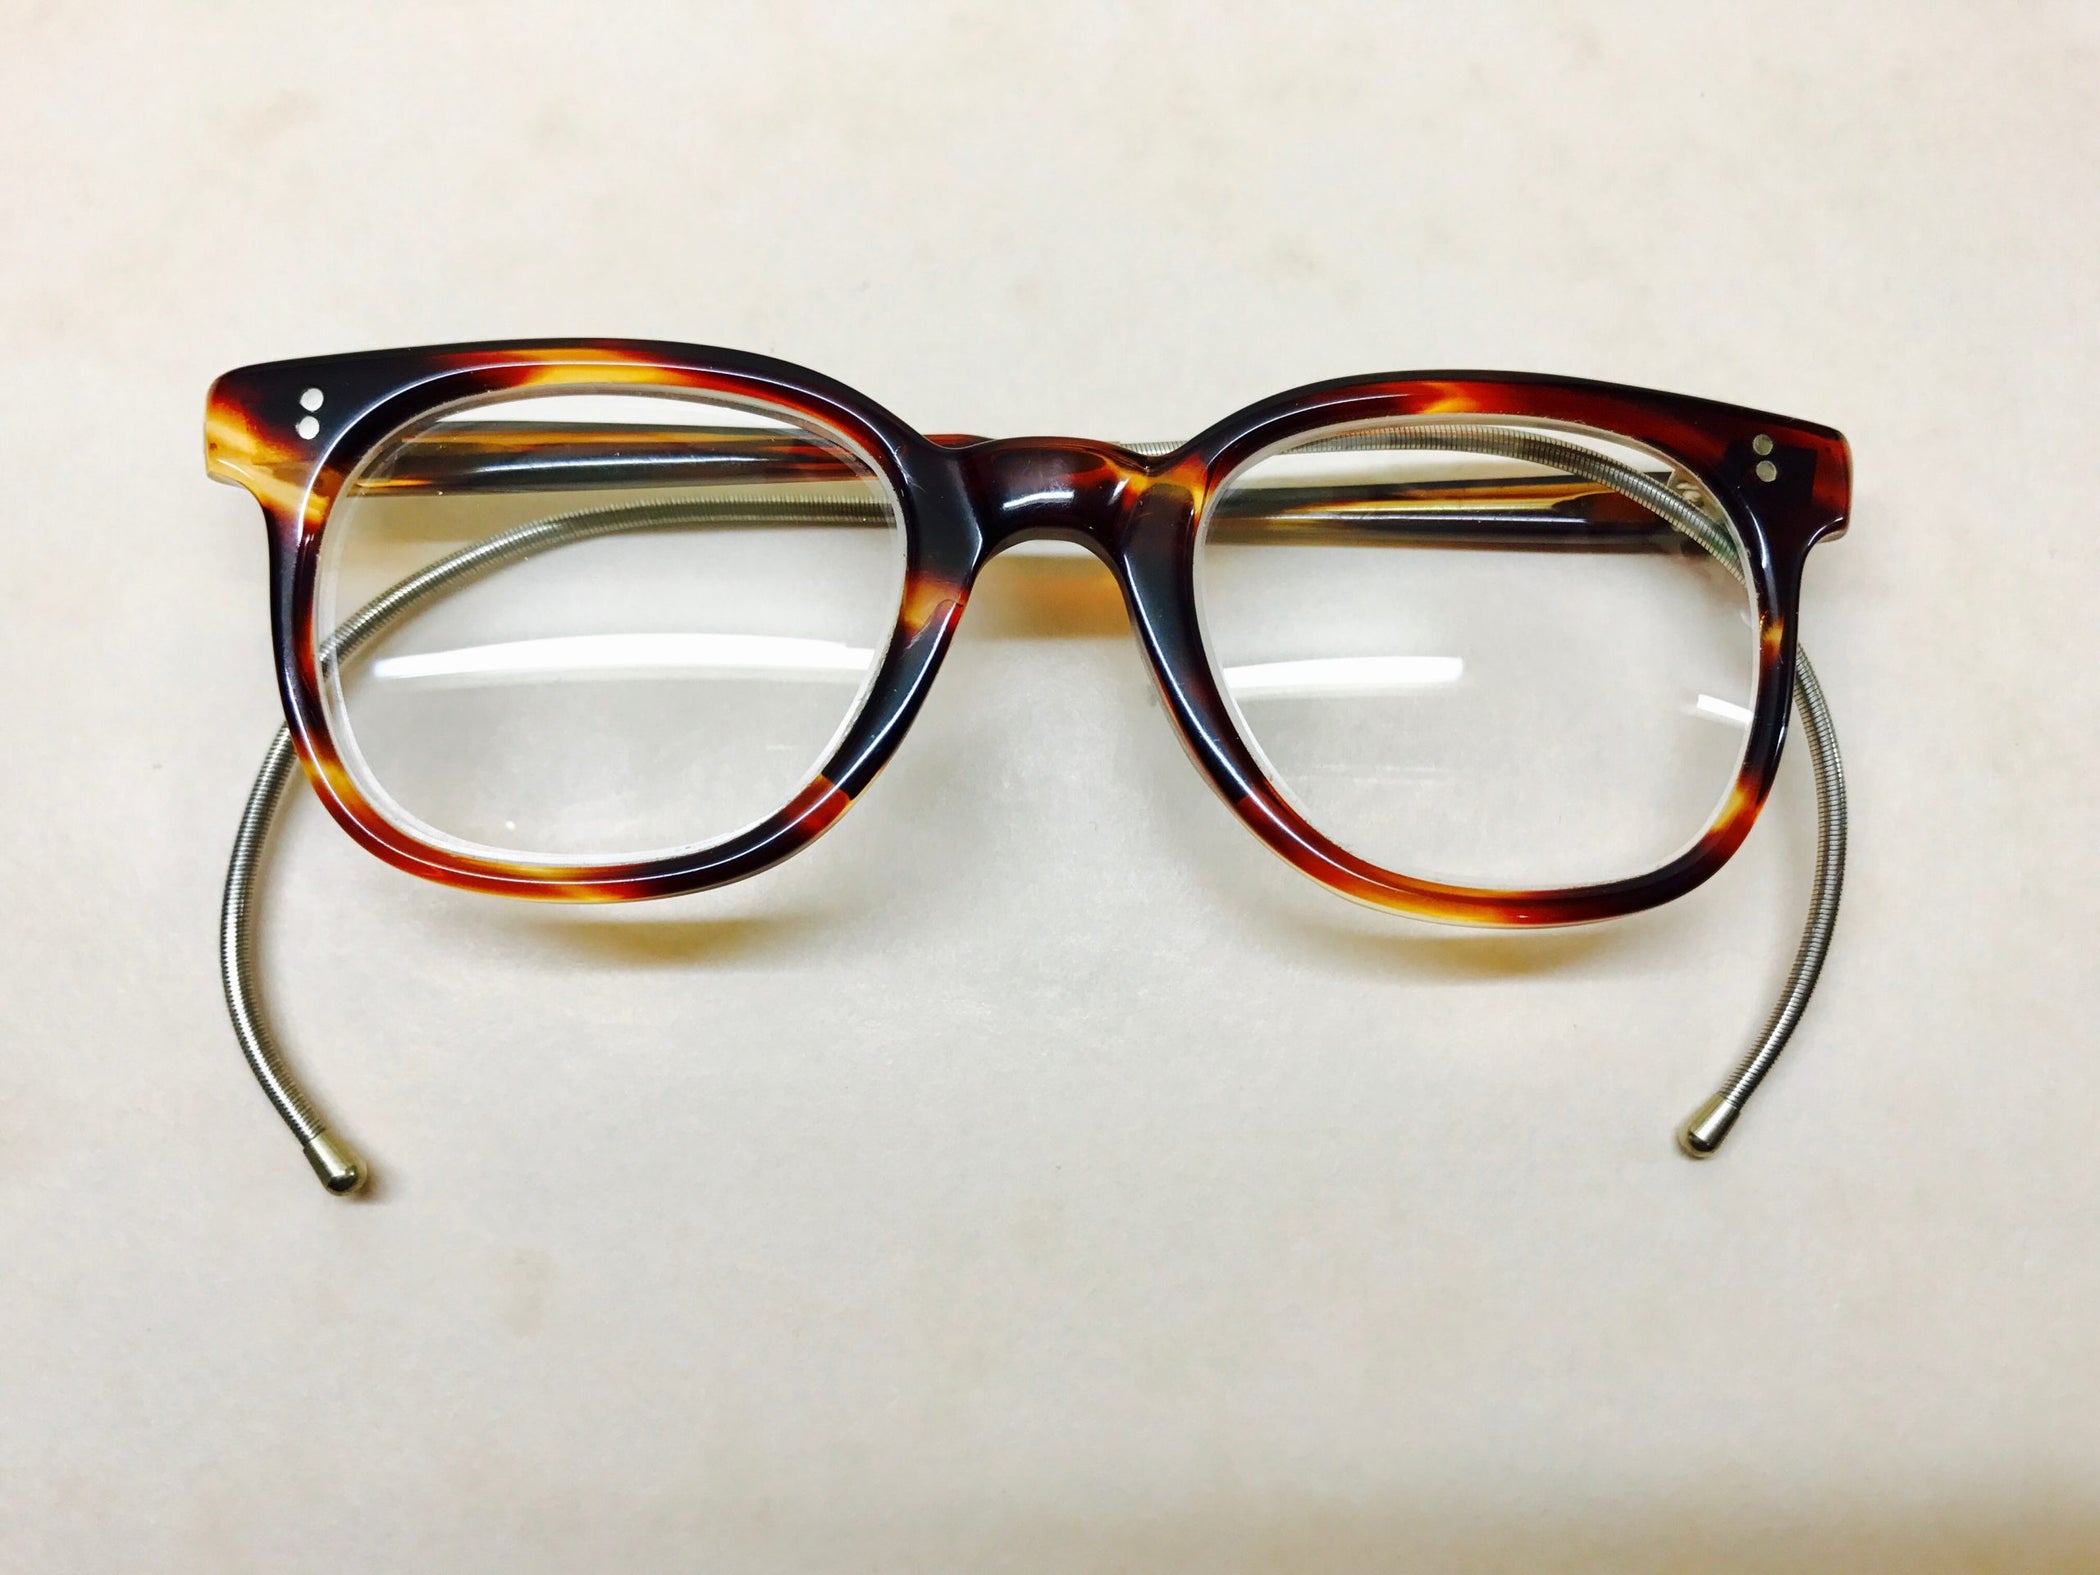 Retro NHS 524 tortoiseshell frames with curl sides